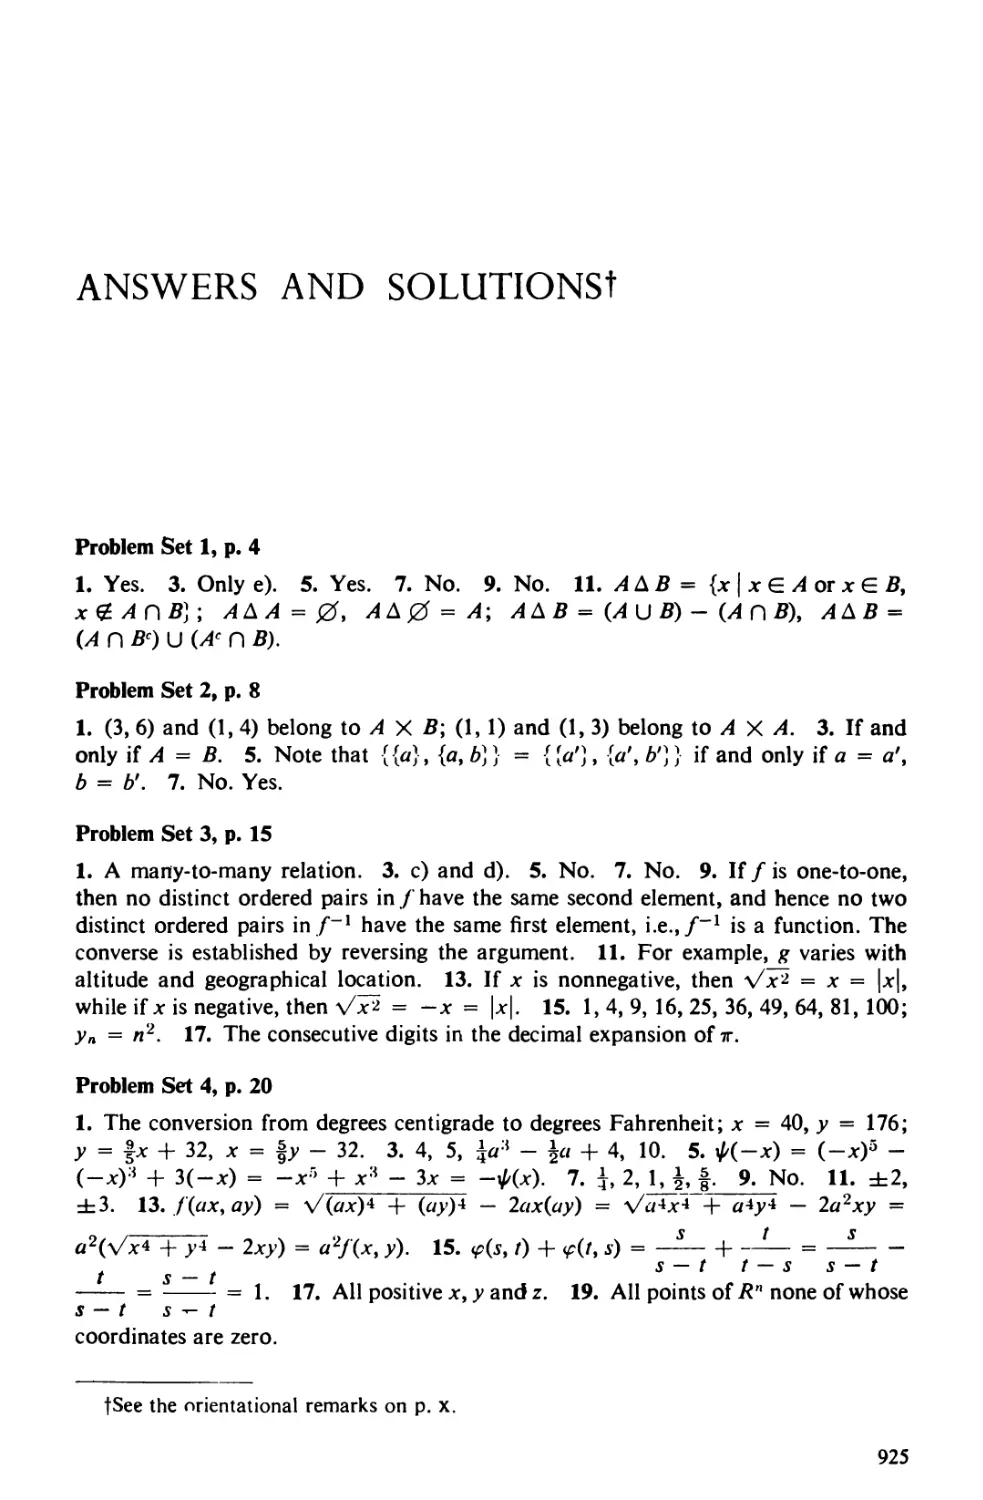 ANSWERS AND SOLUTIONS